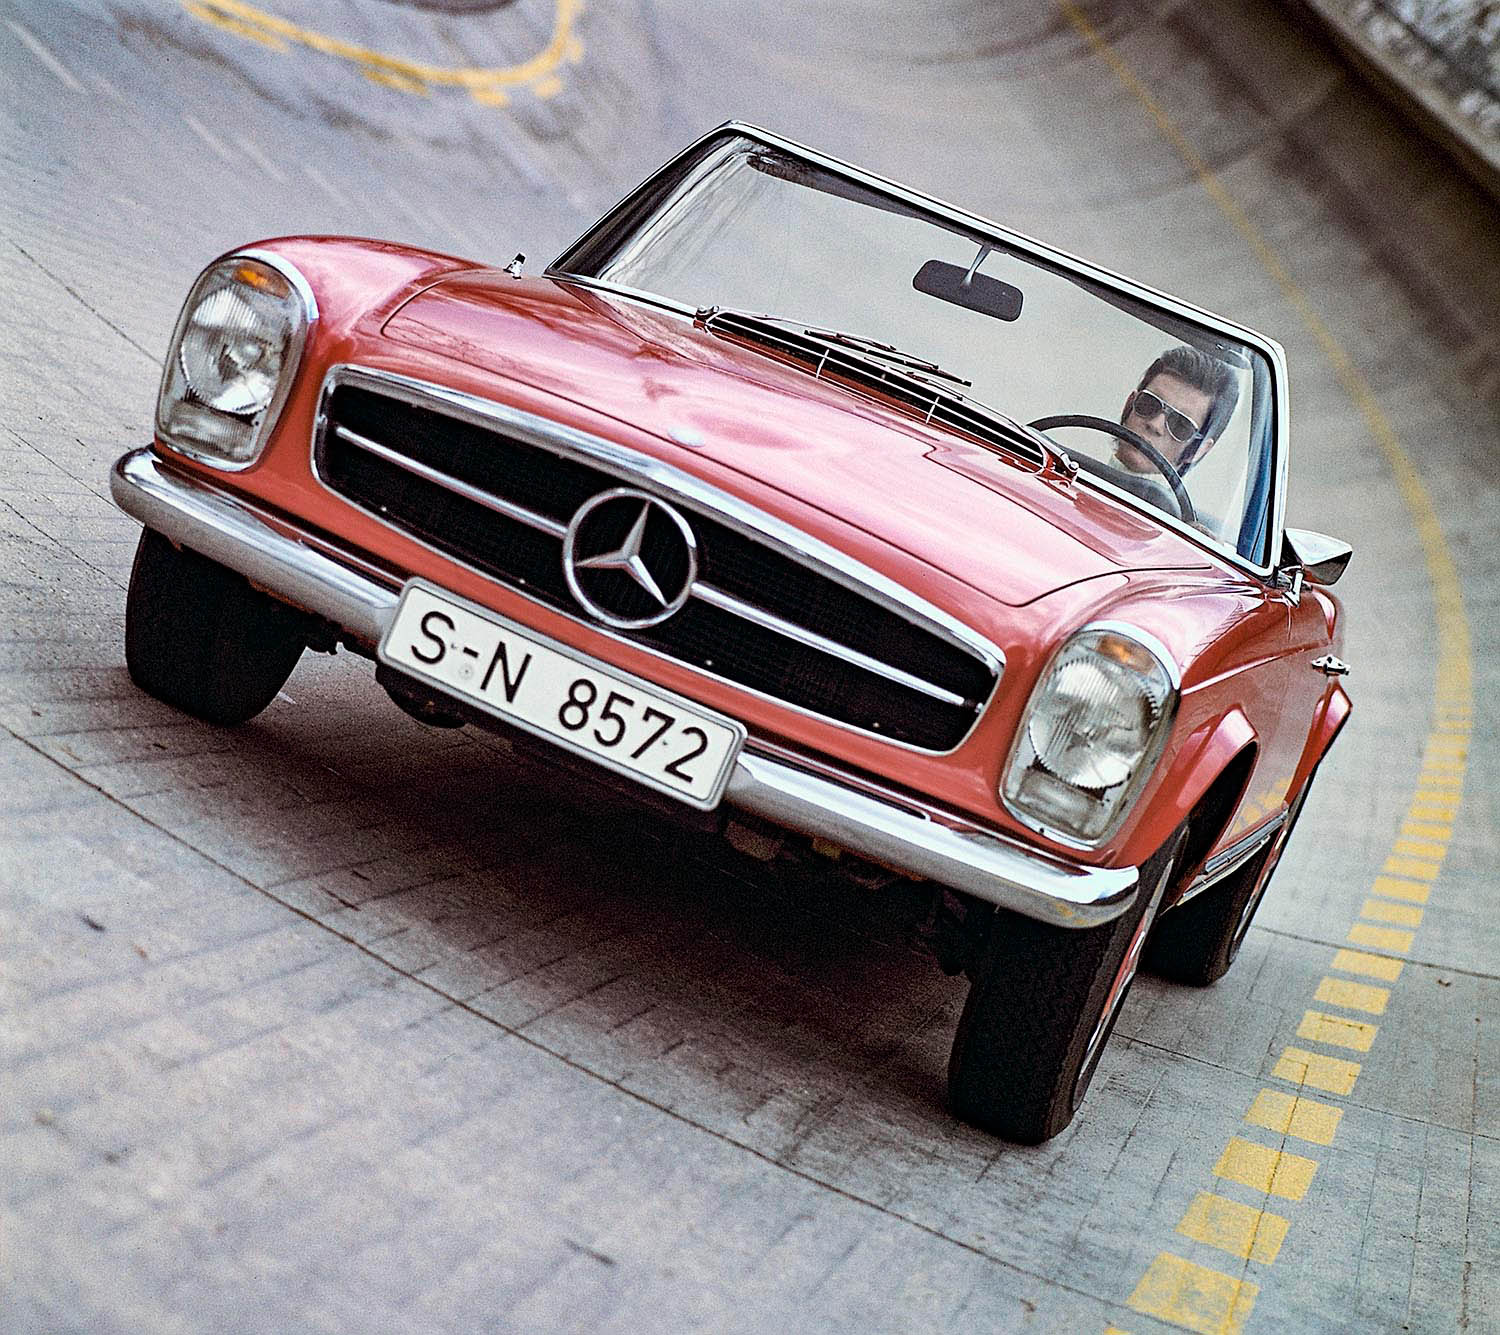 Mercedes-Benz 230 SL Pagoda (W113) in red driving along the high banking of Mercedes-Benz's Untertundefinedrkheim test track.